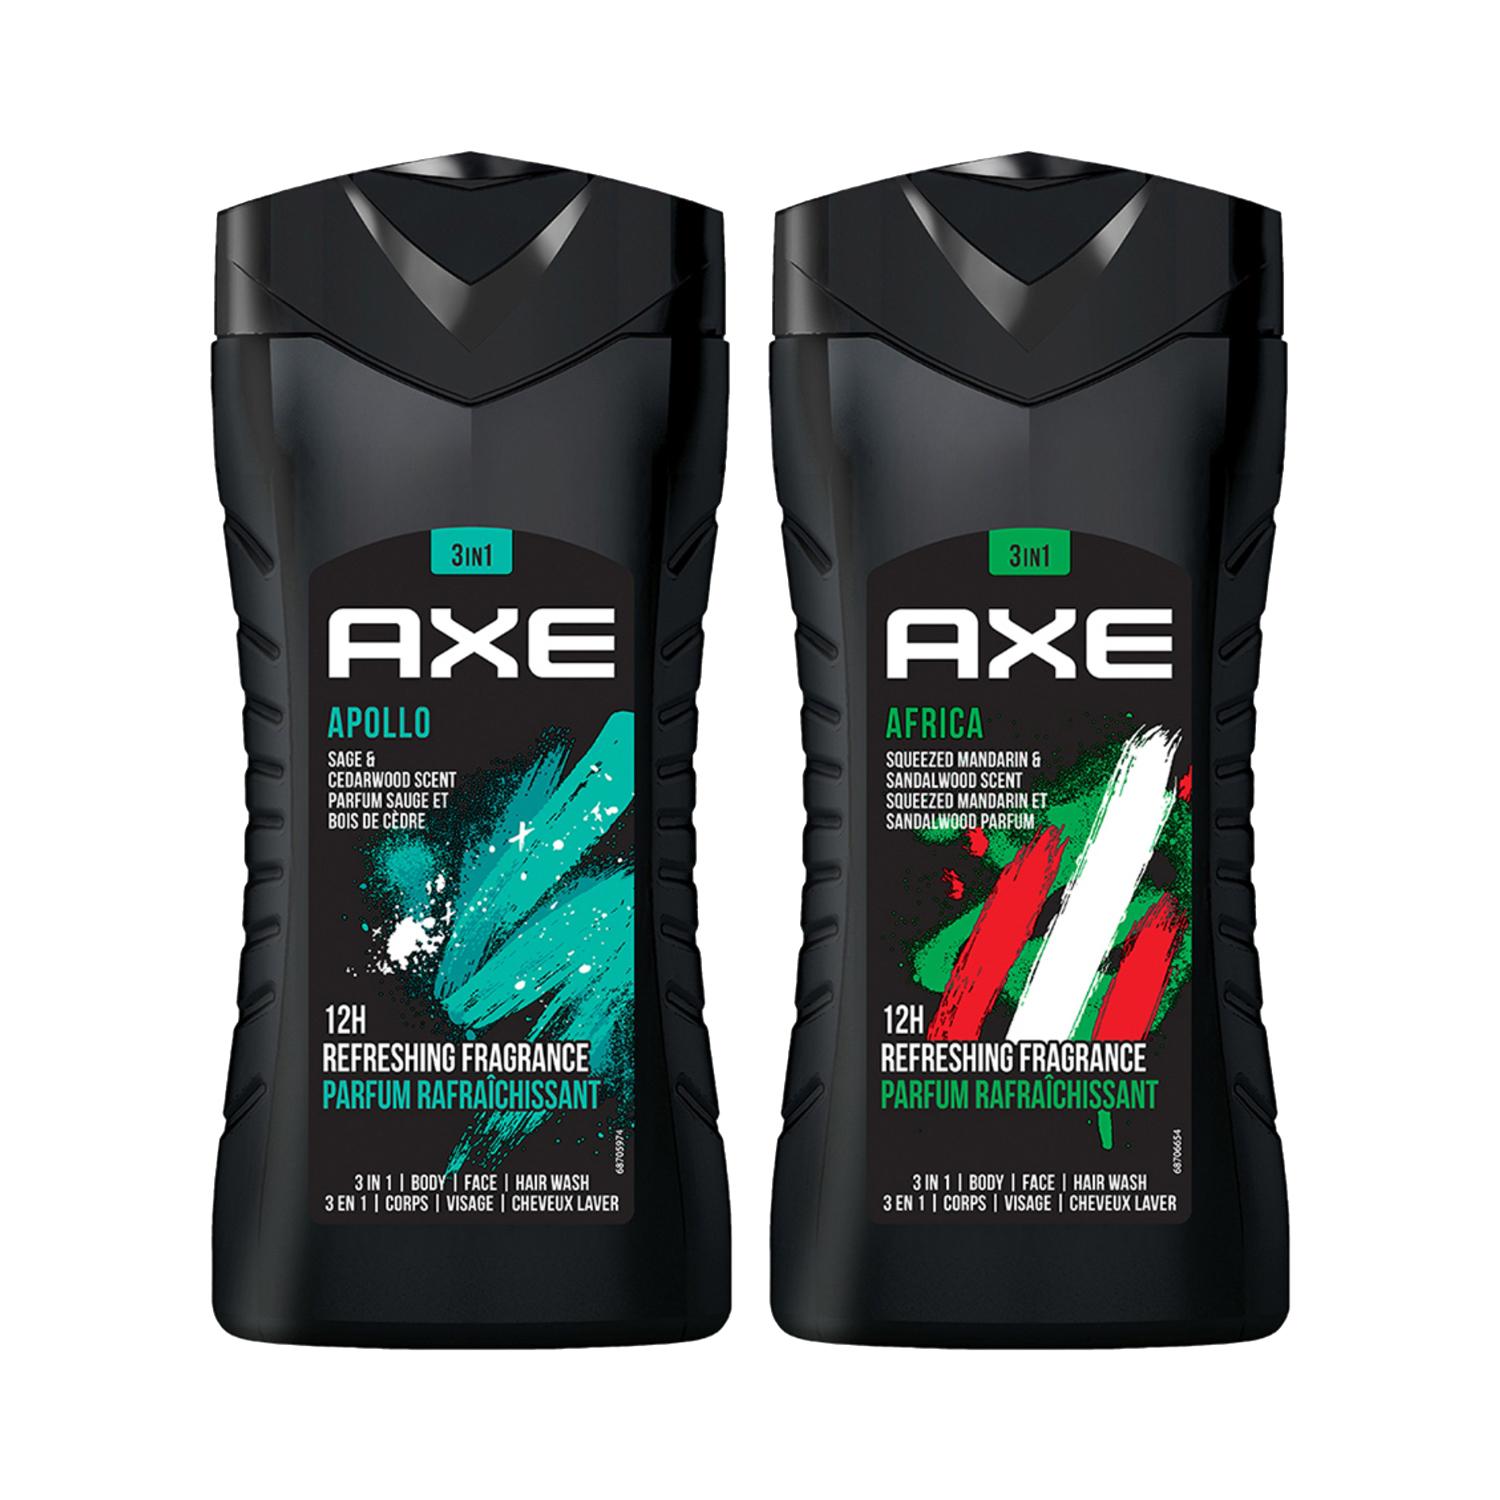 AXE Denim Lather Shaving Cream, 60 g (with 30% Extra) (Pack of 3) Free  Shipping | eBay